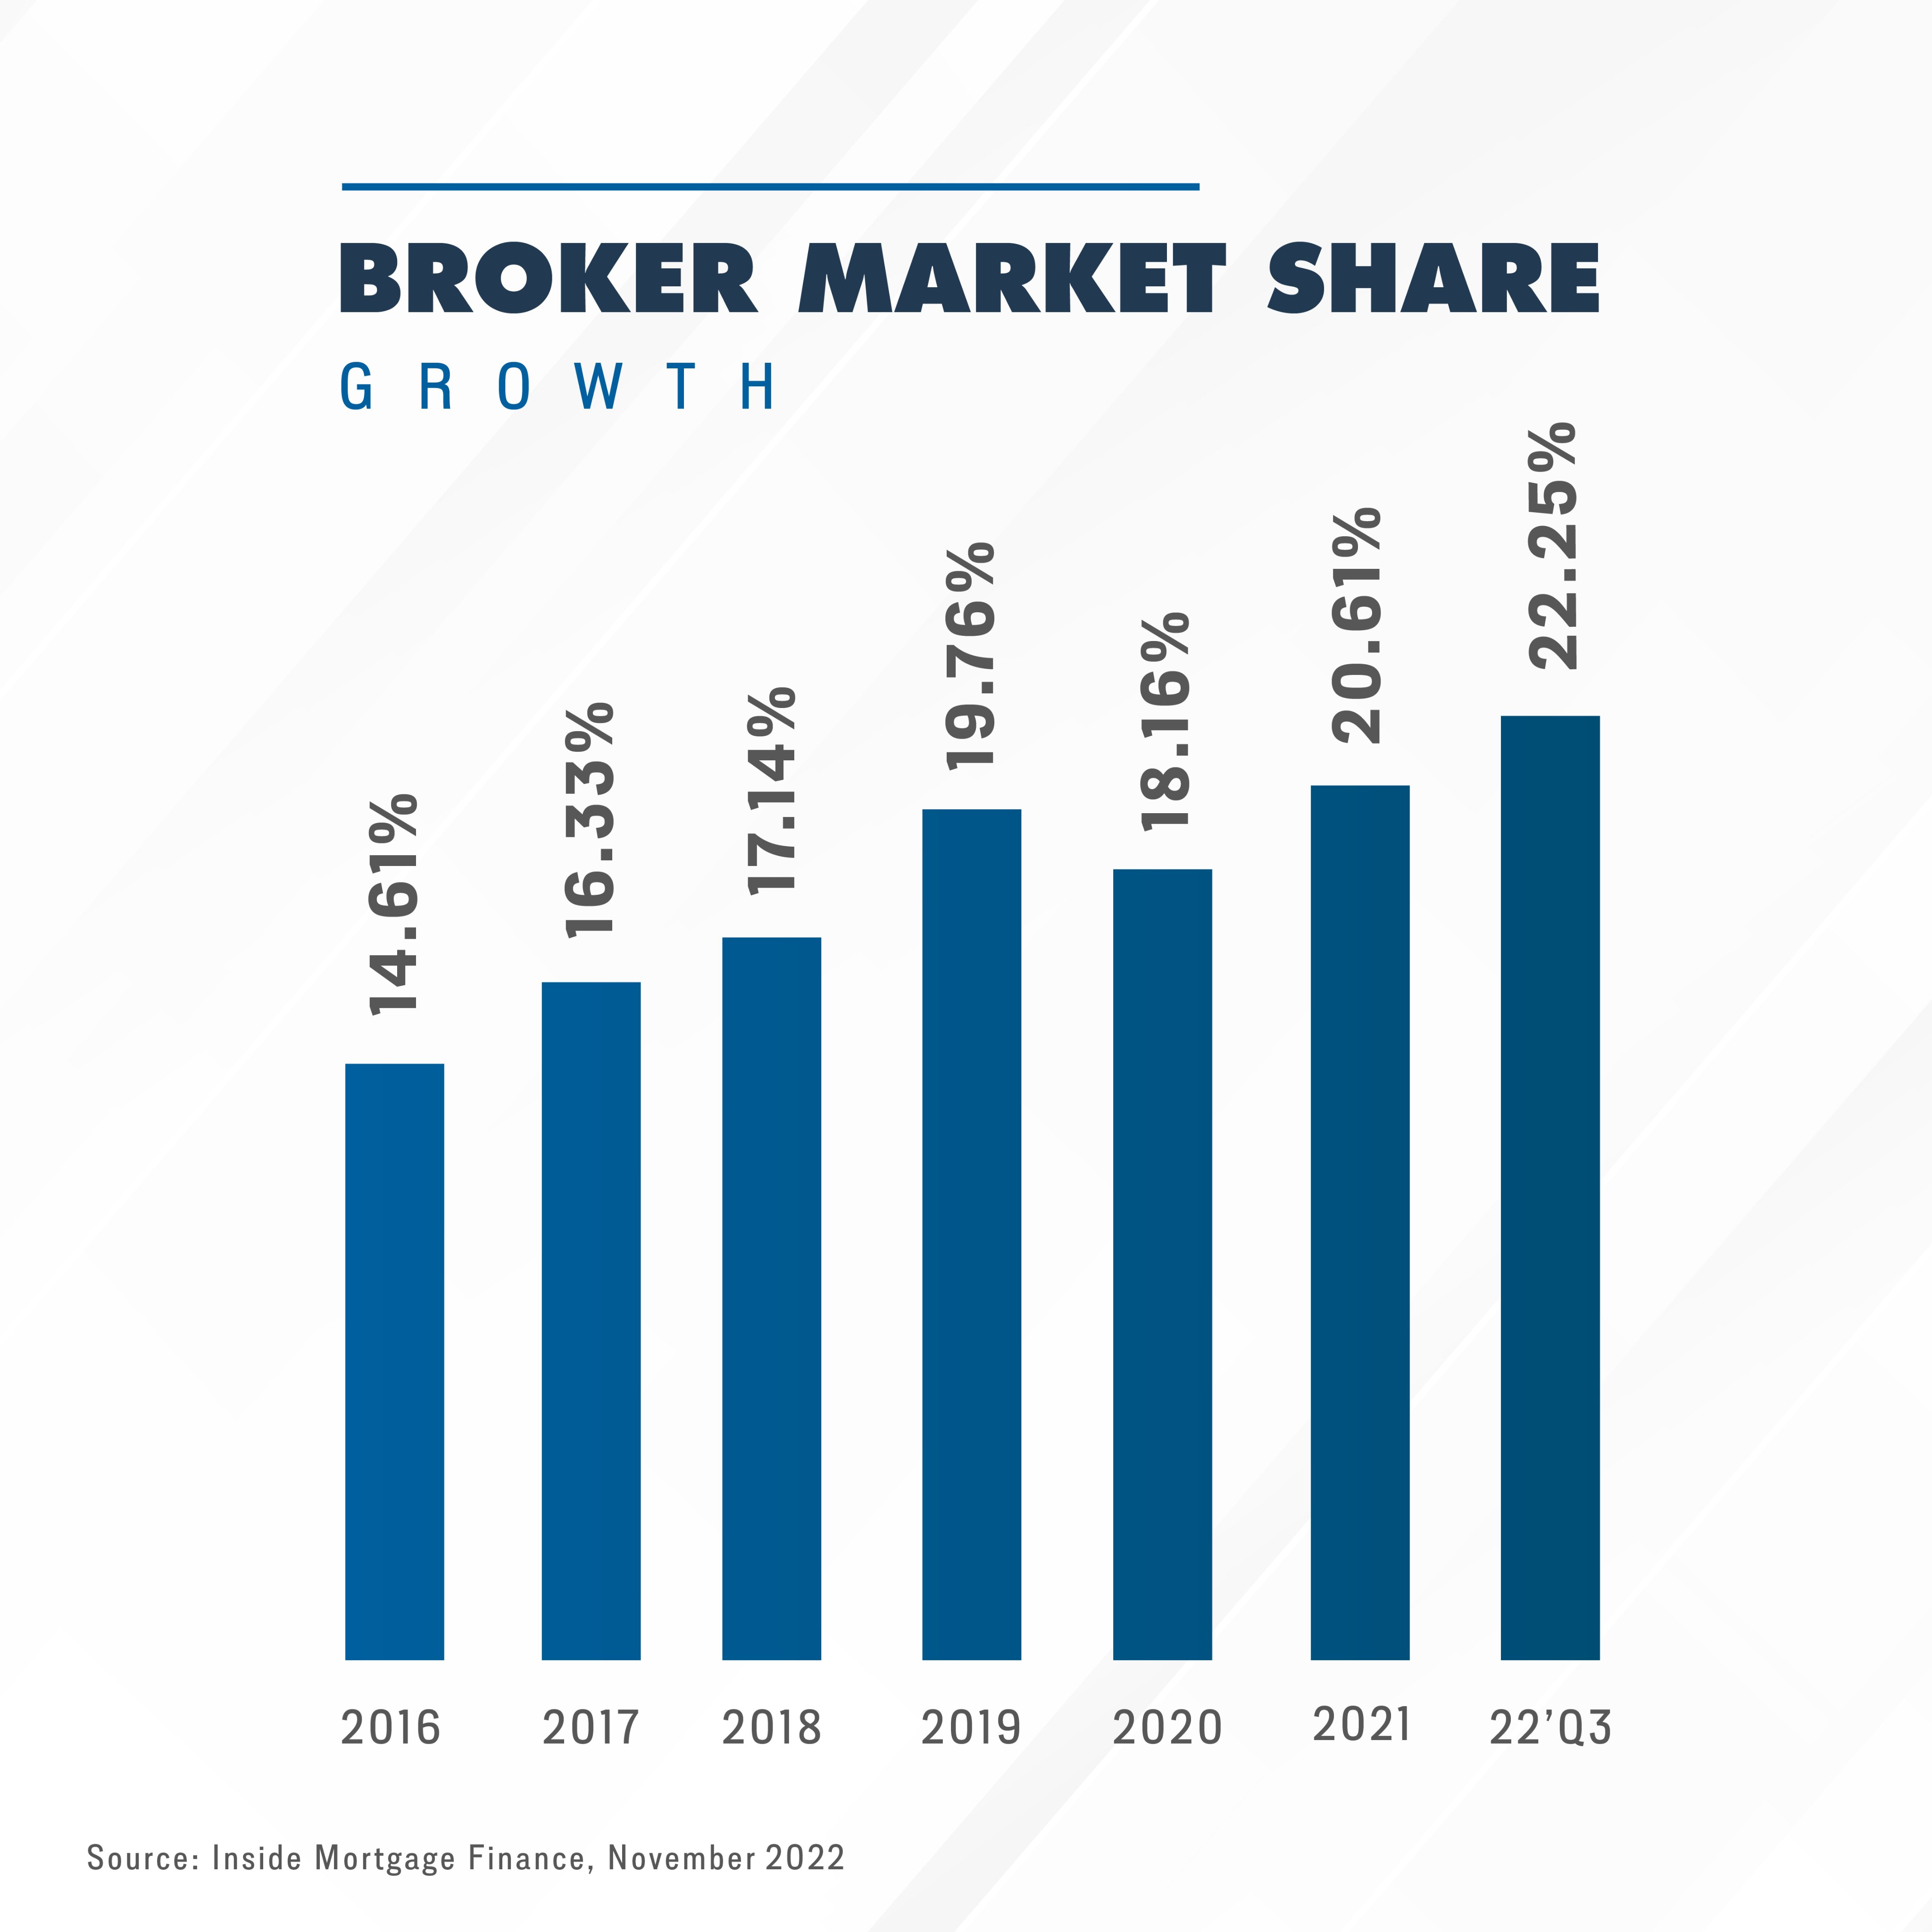 A graph shows the increasing broker market share over the years 2016-2022. 2016 is 14.61%,2017 is 16.33%, 2018 is 17.14%, 2019 is 19.76%, 2020 is 18.16%, 2021 is 20.61%, and 2022 up till the third quarter is 22.25%